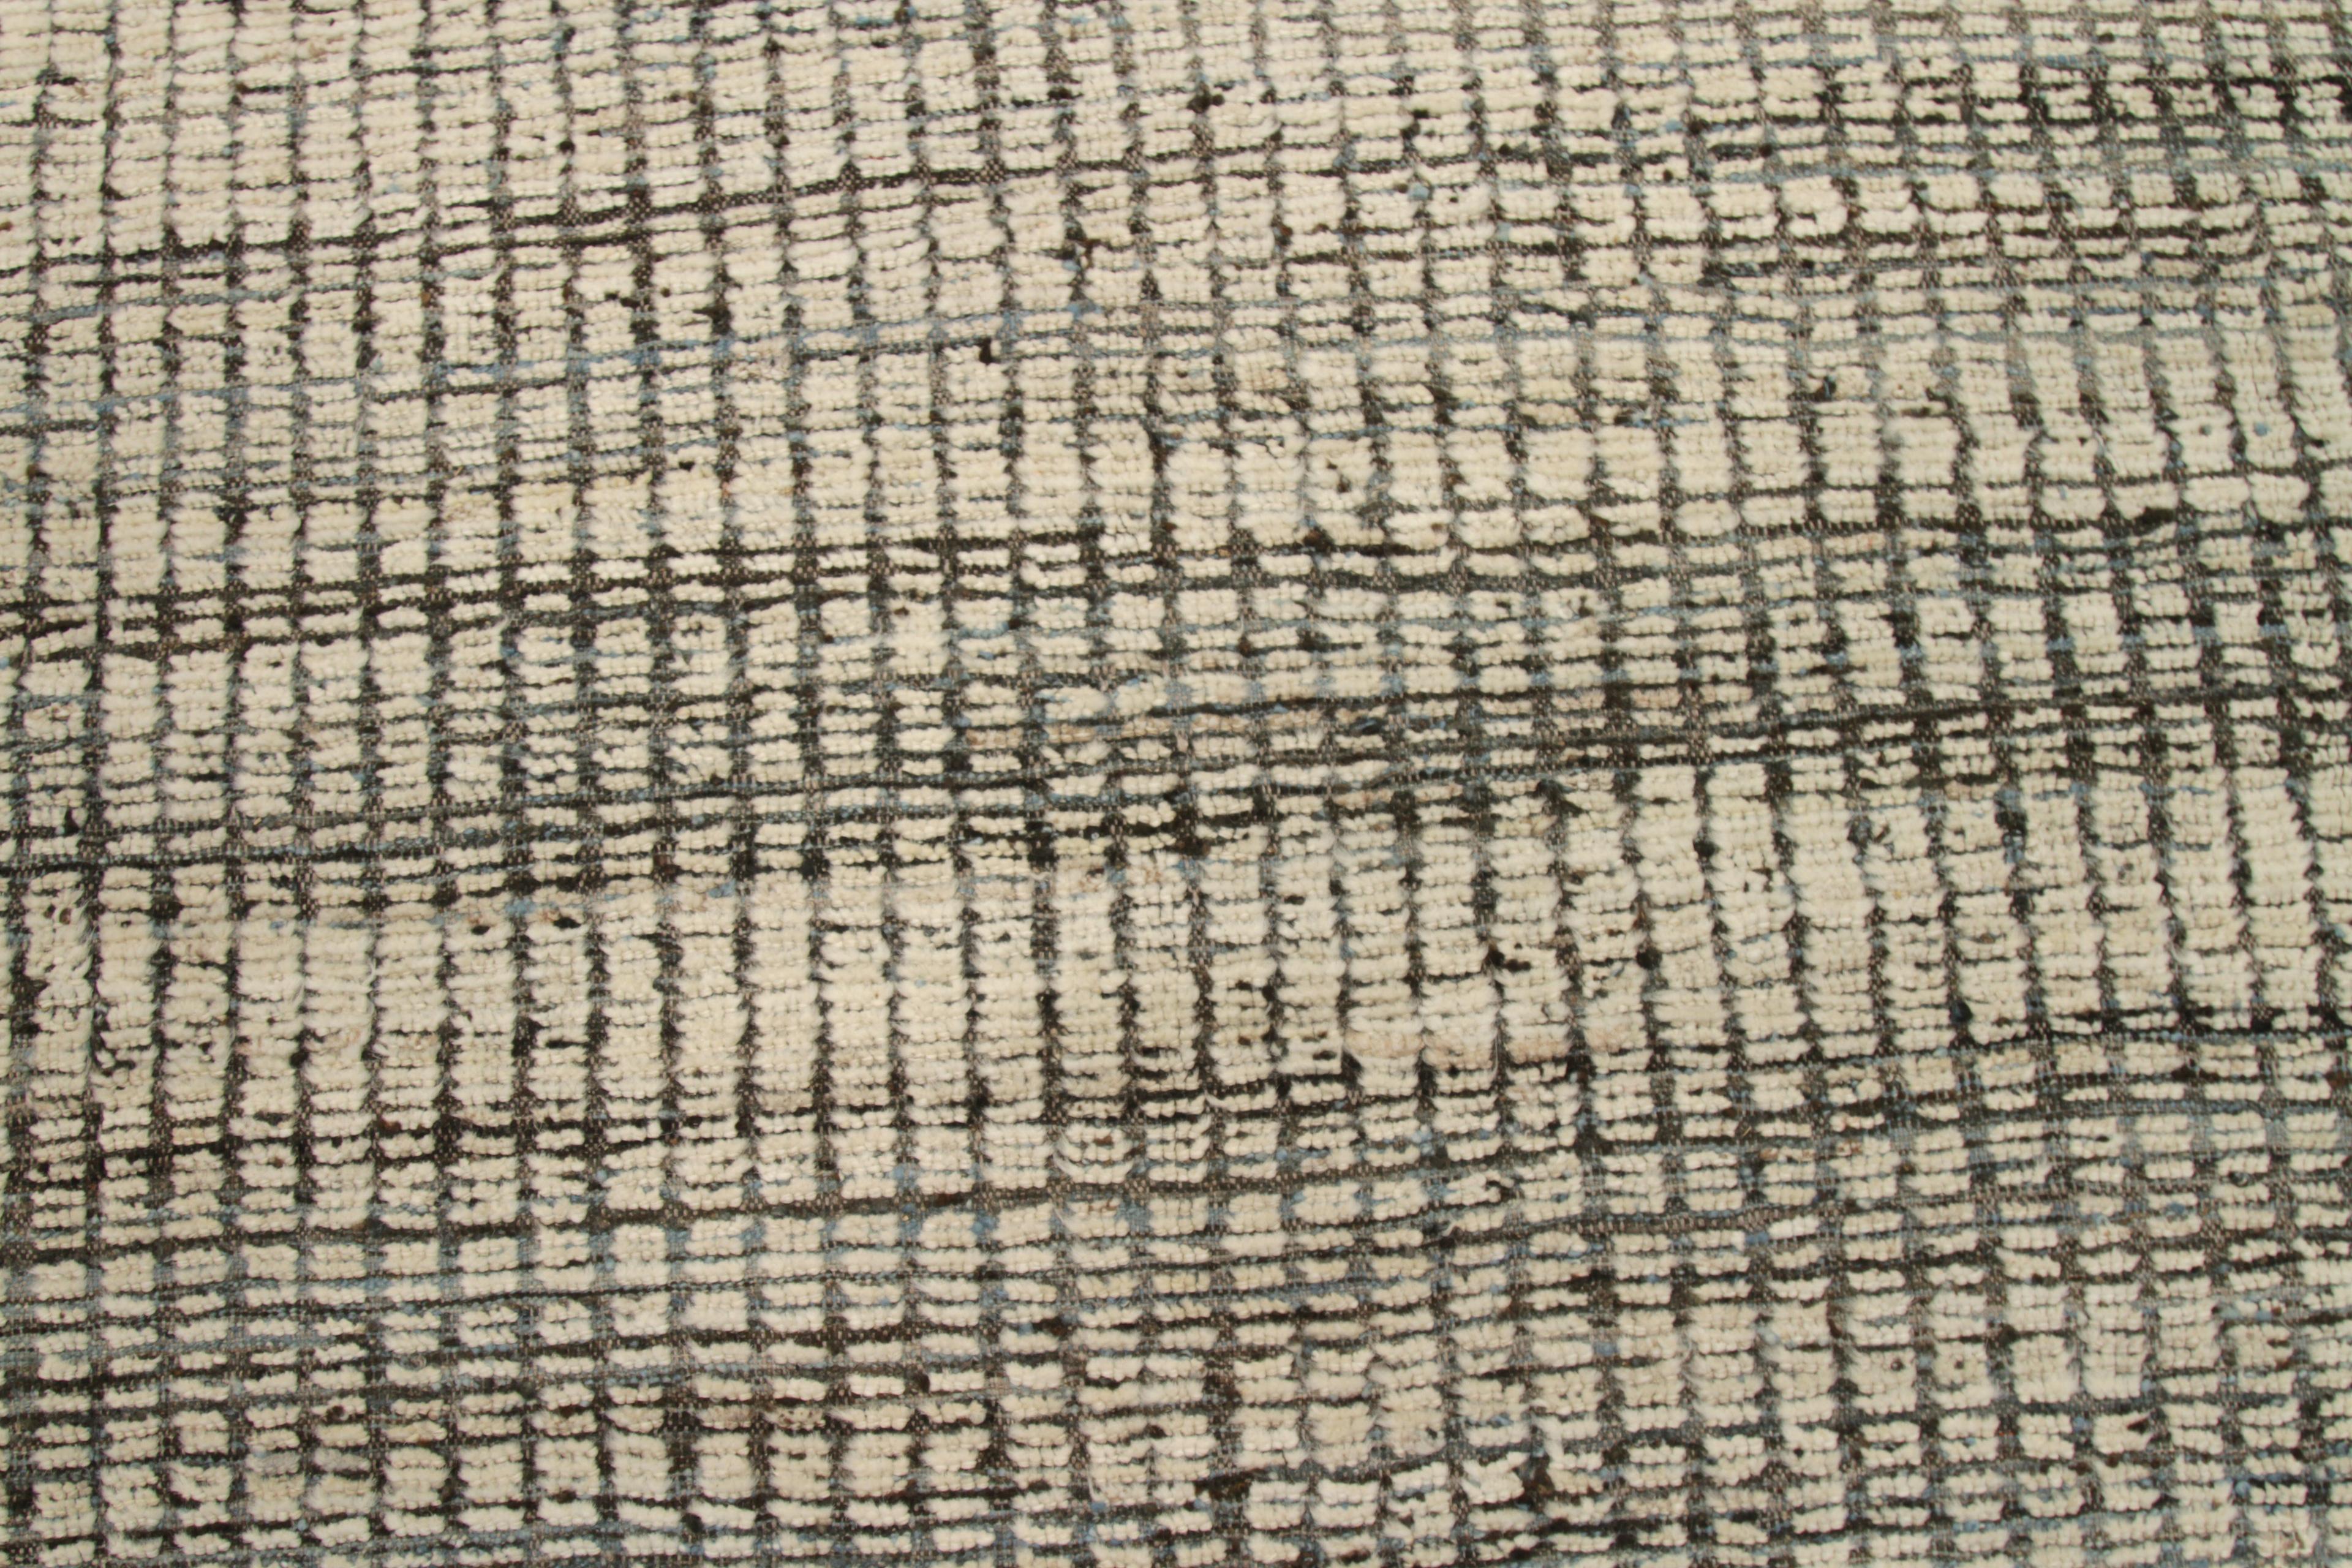 Gorgeous Charcoal Beige Textured Modern Distressed Rug, Country of Origin: Afghanistan, Circa Date: Modern. Size: 9 ft 8 in x 12 ft (2.95 m x 3.66 m)